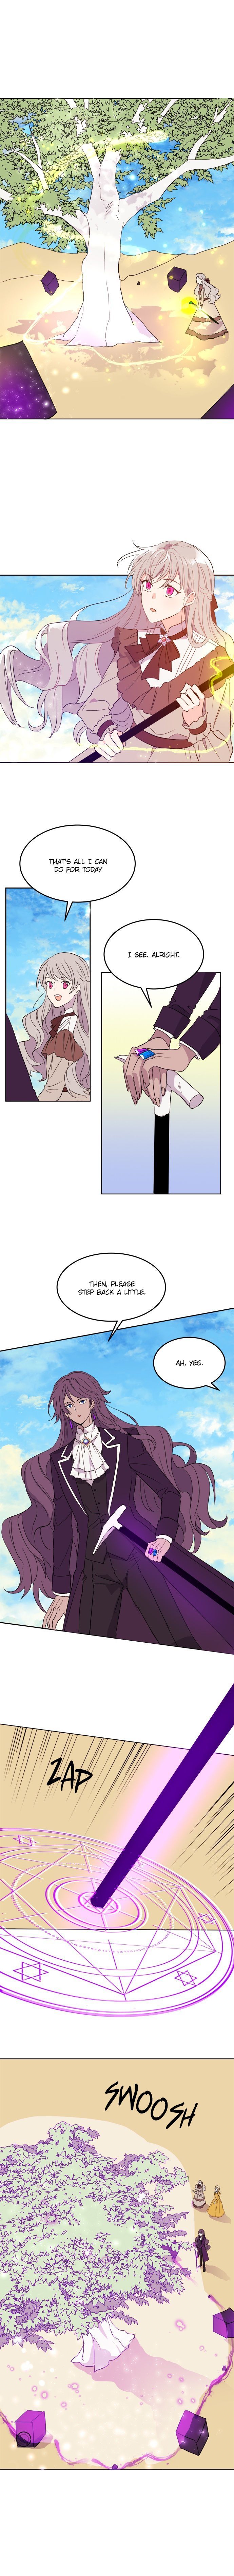 The Garden of Red Flowers chapter 40 - Page 3